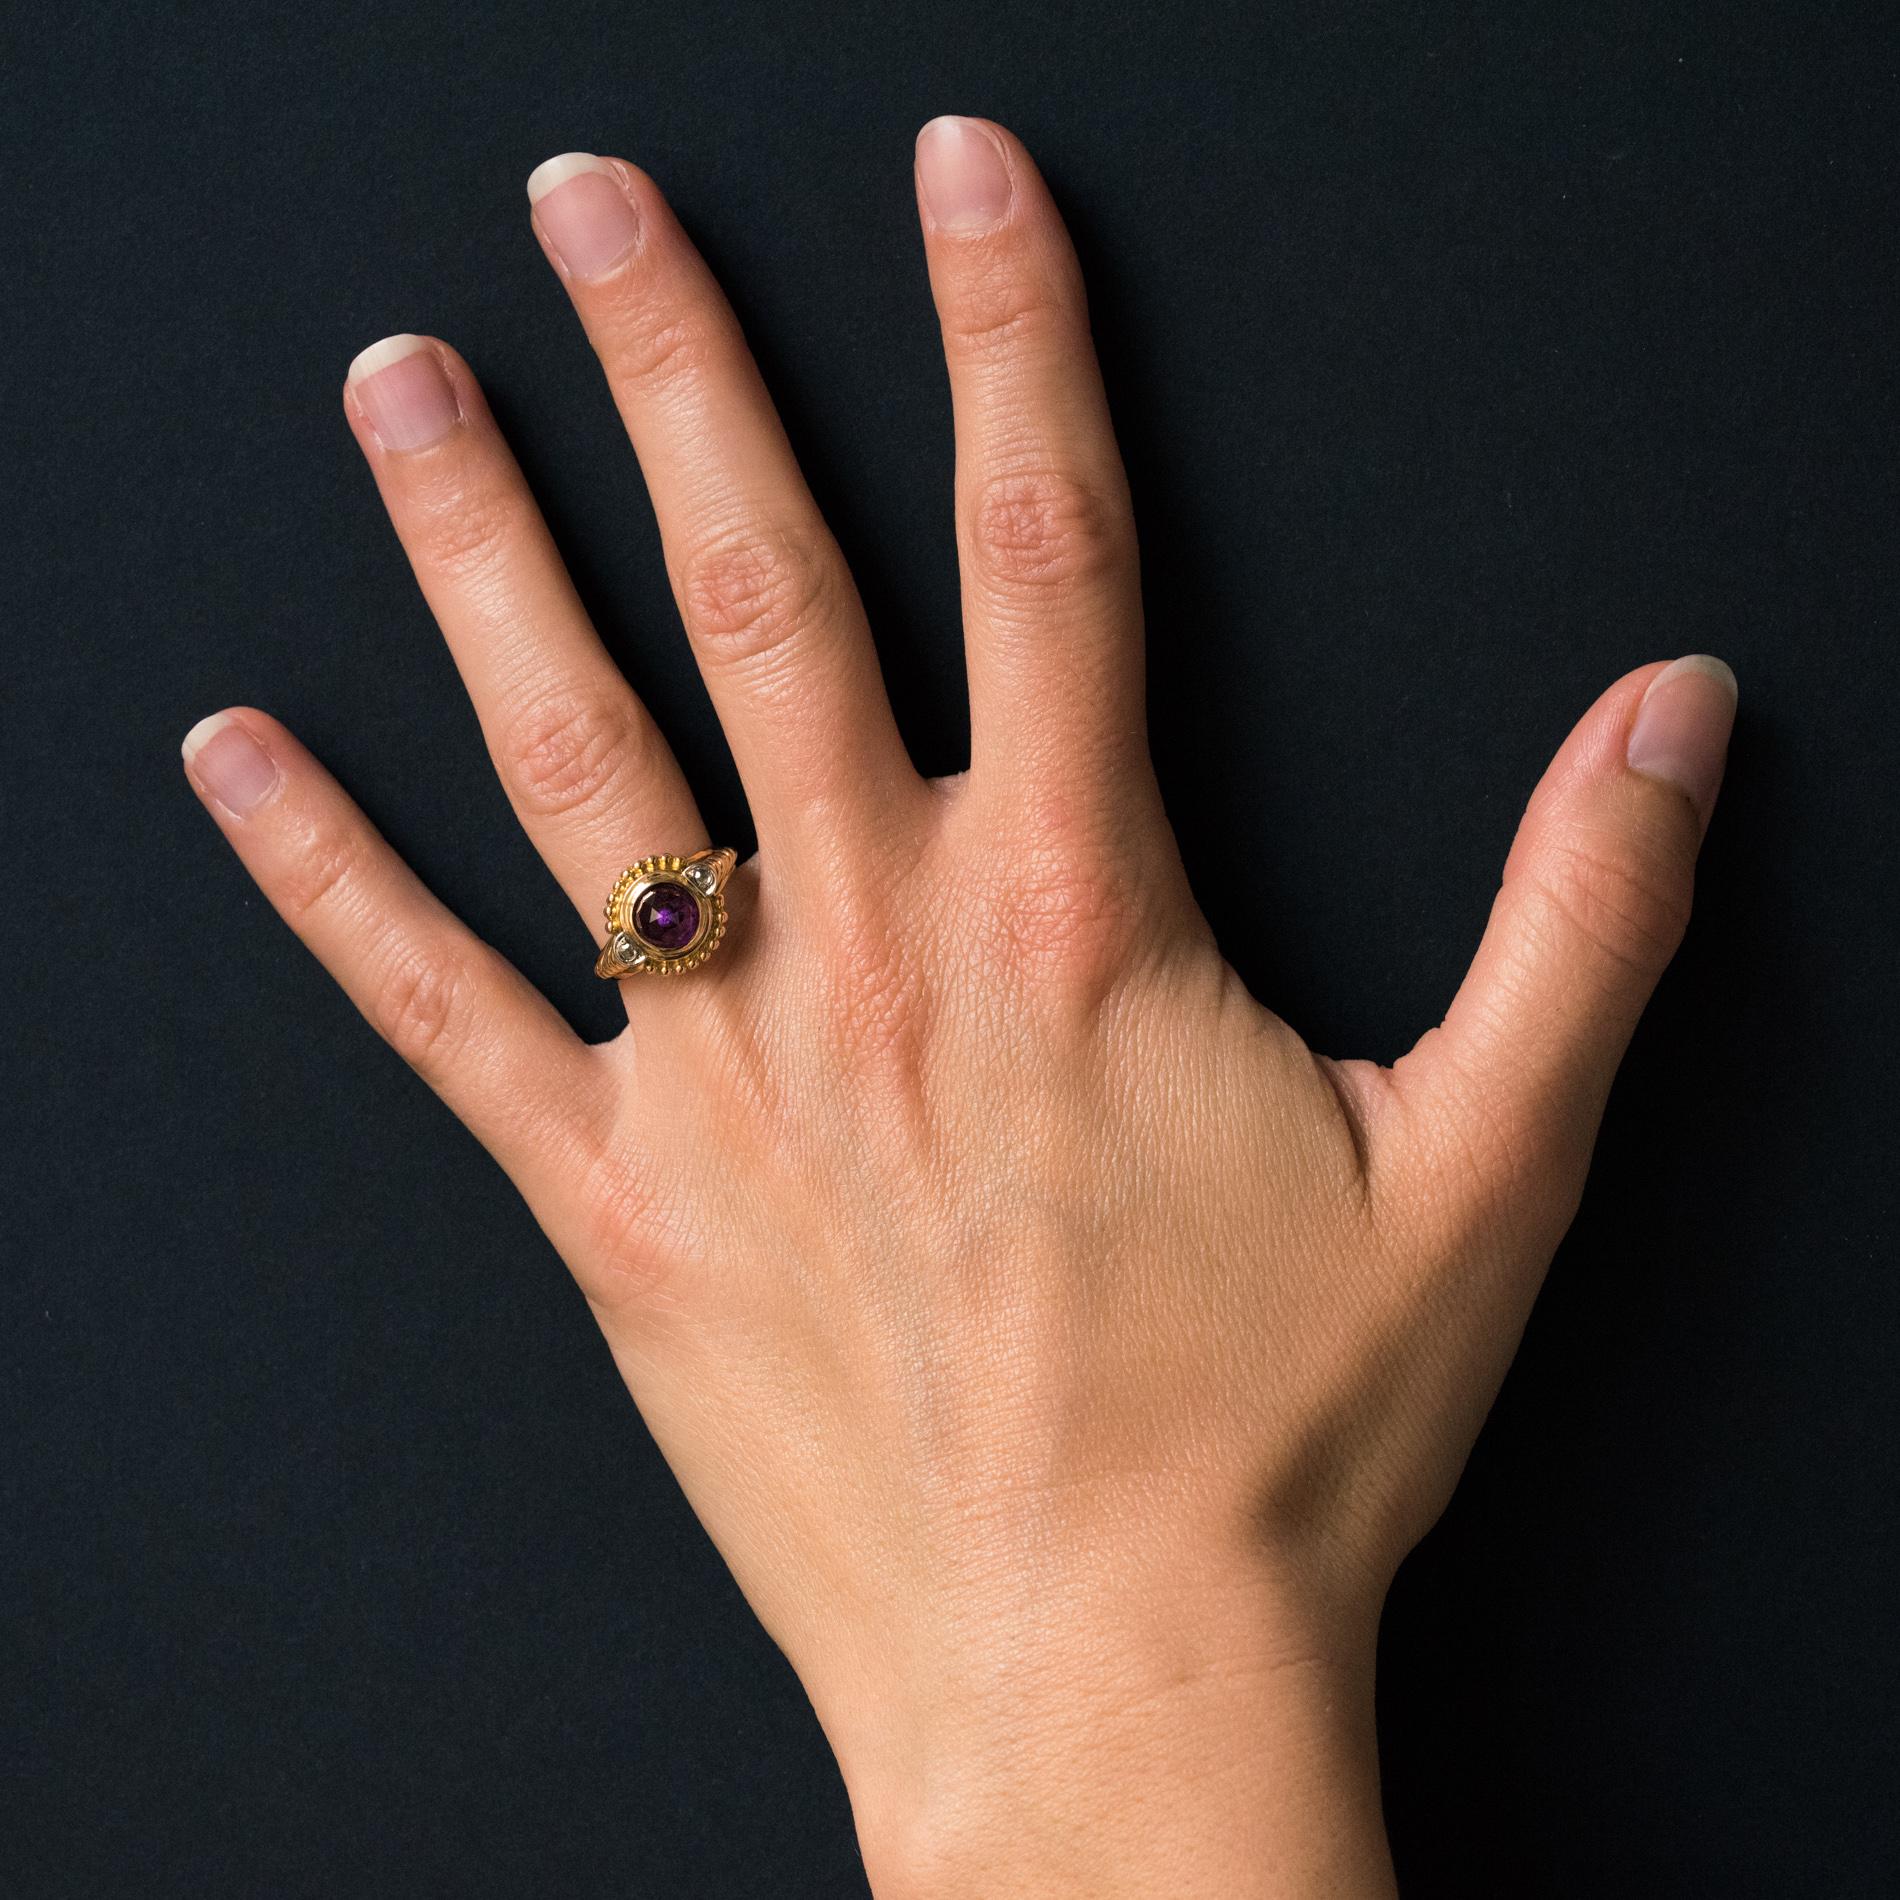 Ring in 18 karat yellow gold.
This charming antique ring is adorned with a briolette amethyst, supported by two rose-cut diamonds edged with pearl. The start of the ring is a thin twist.
Height: 12.7 mm, width: 13.2 mm, thickness: 7.4 mm, width of